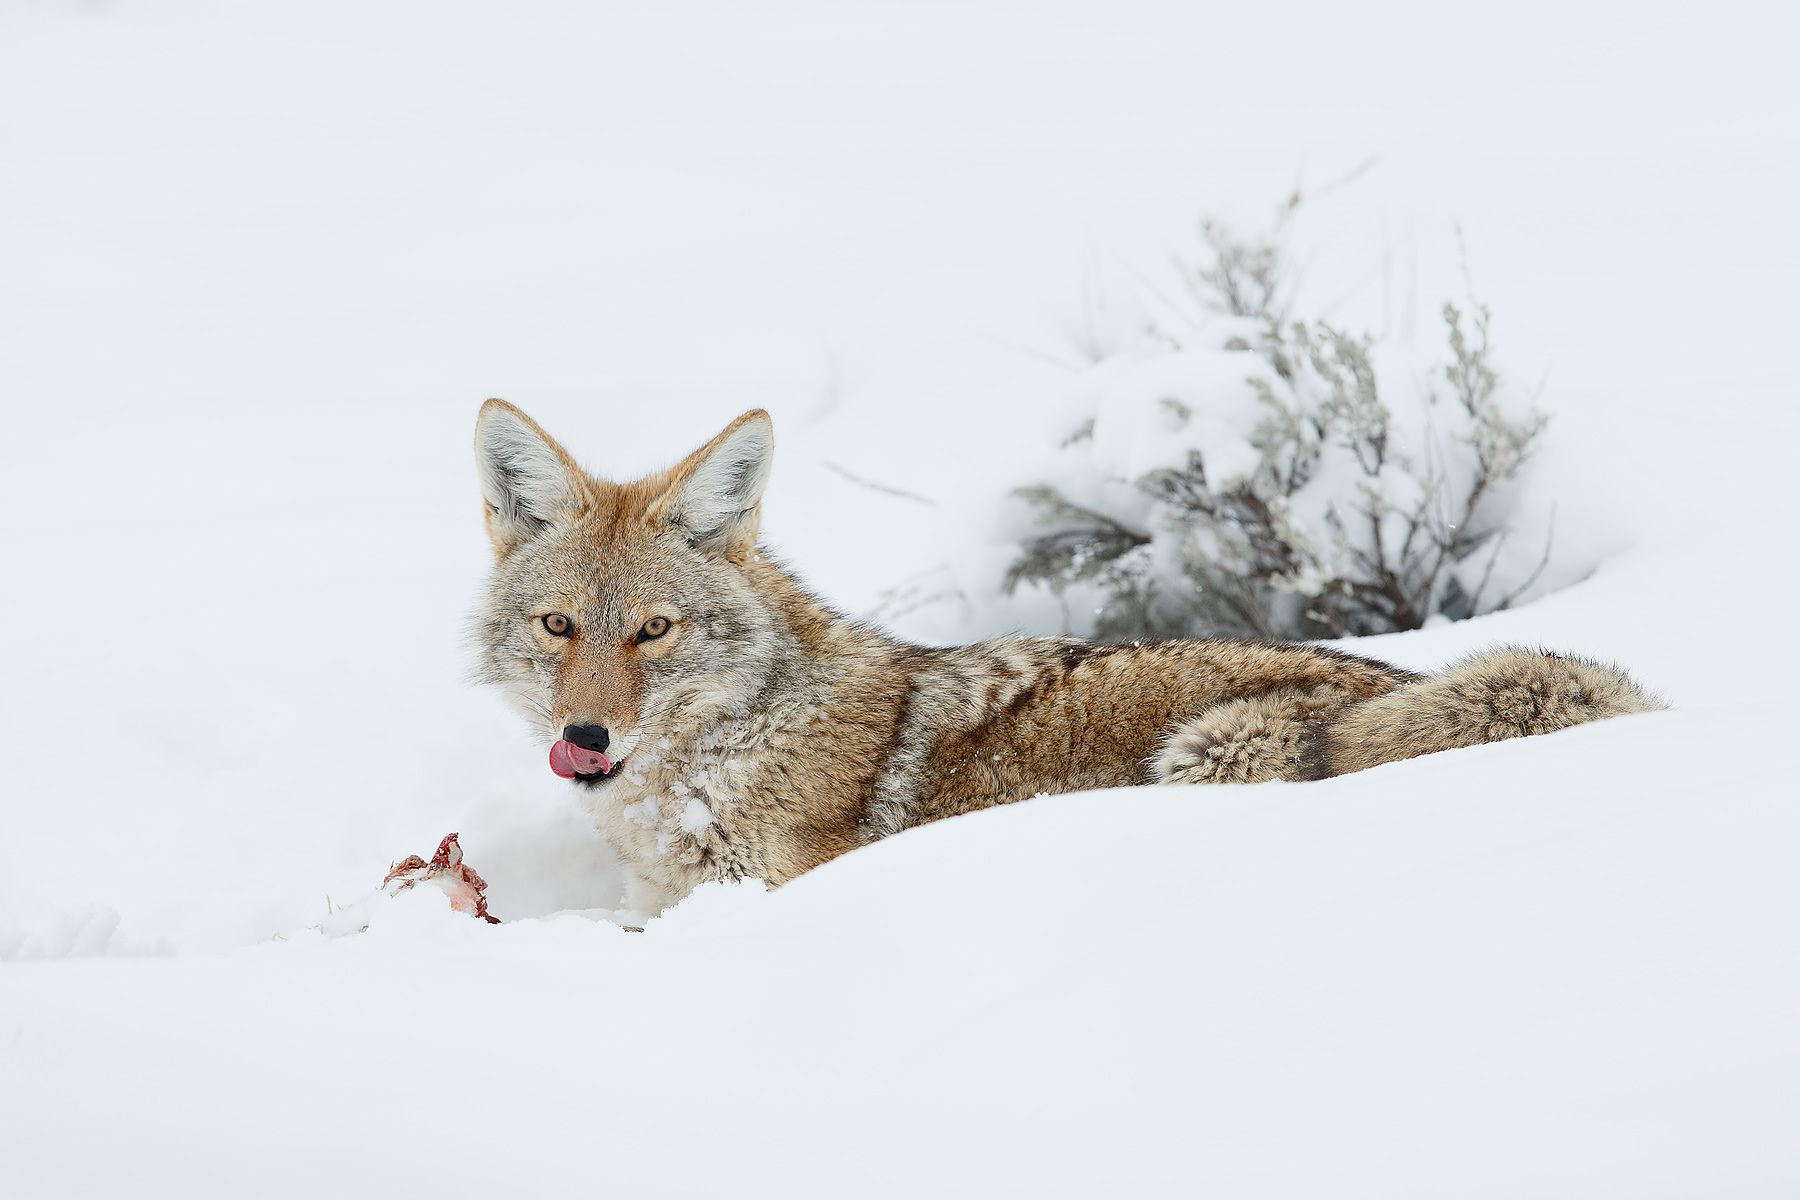 Coyote-eating-prey-in-snow-II_E7T4562-Lamar-Valley,-Yellowstone-National-Park,-WY,-USA.jpg